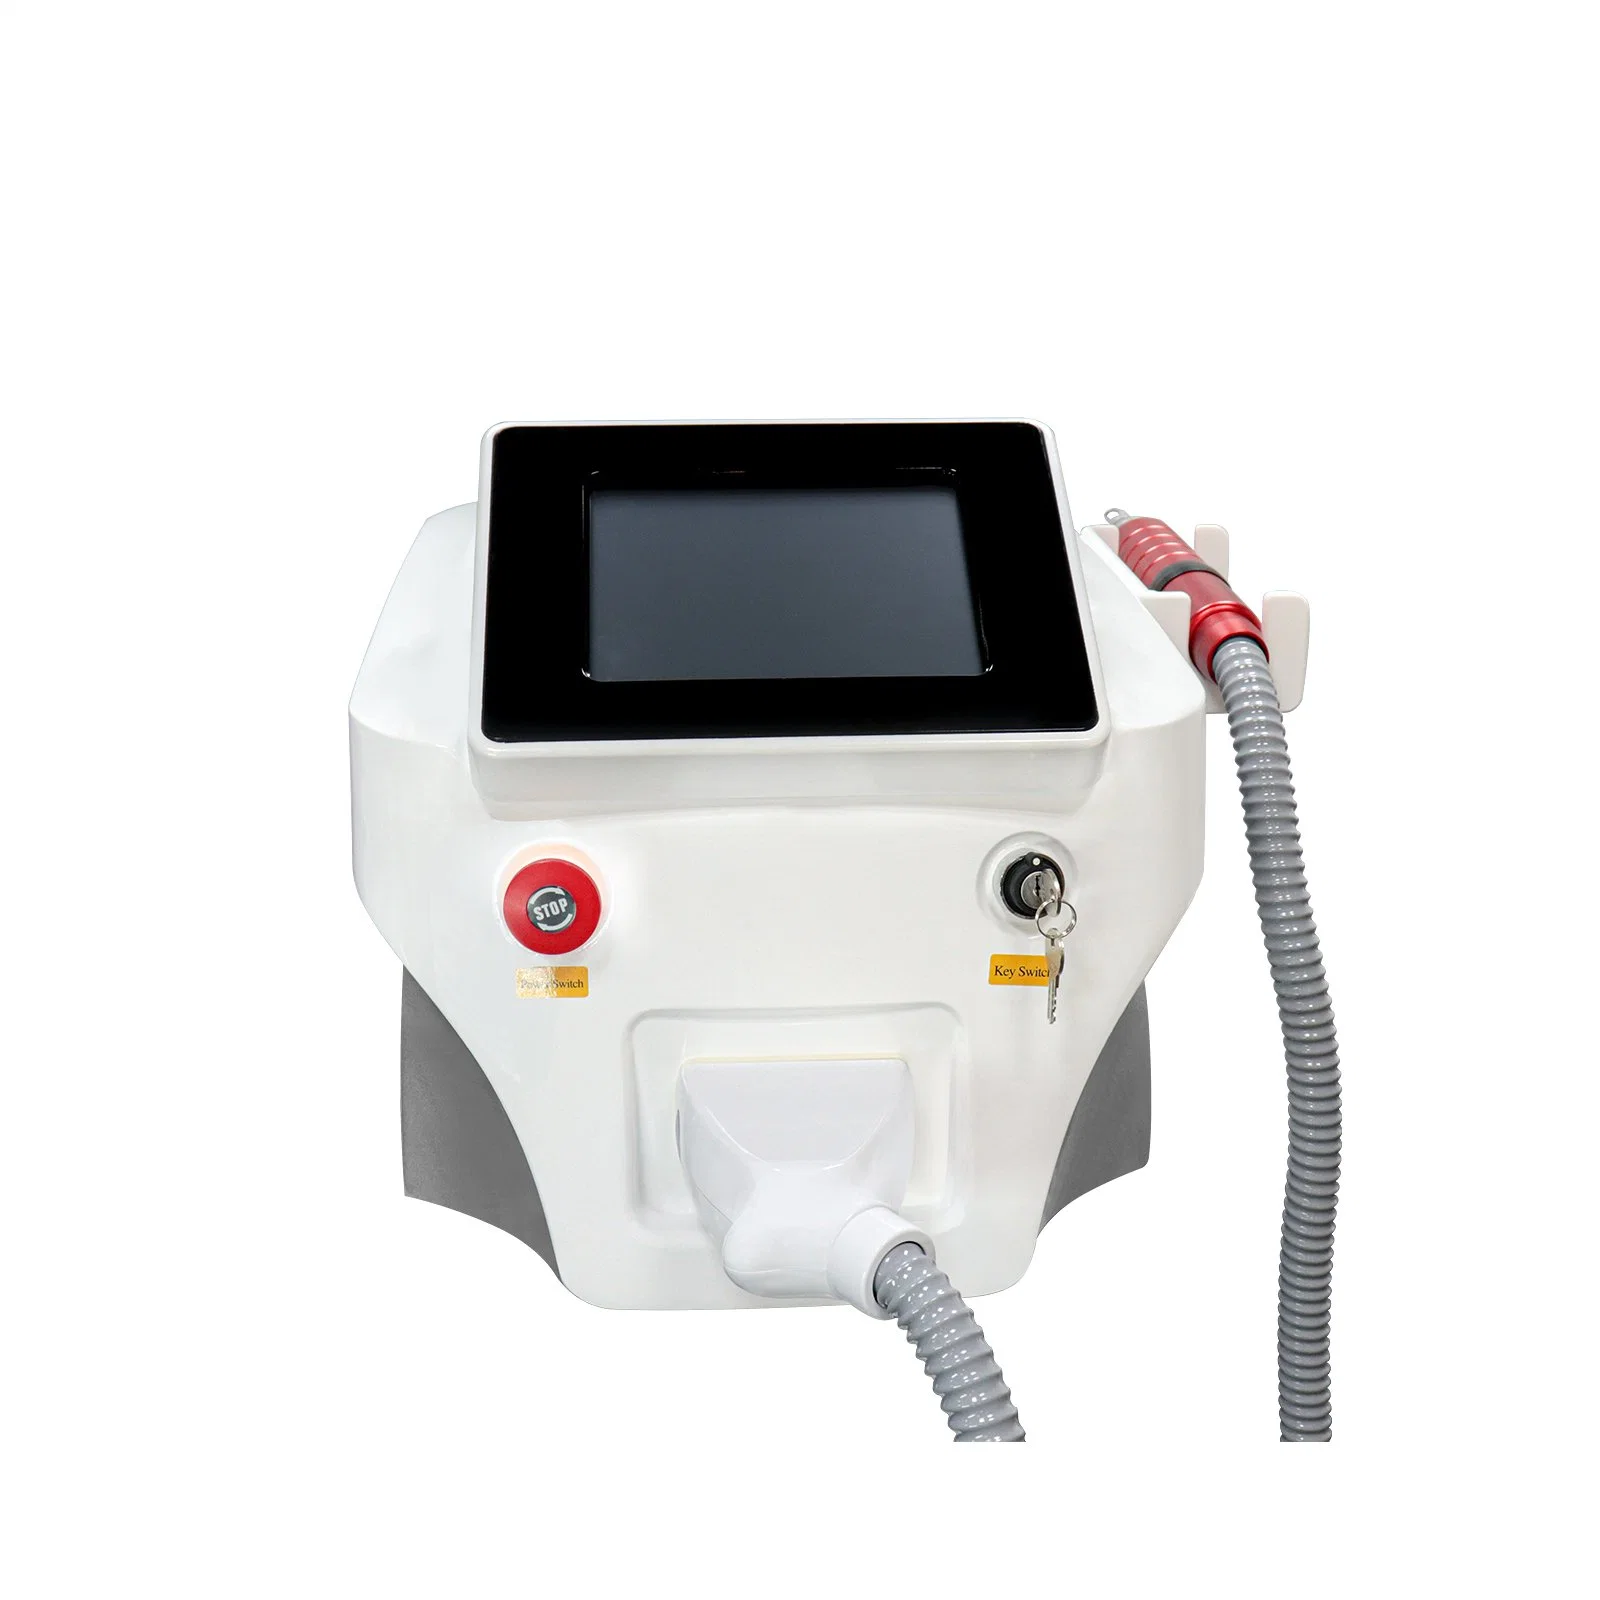 Portable ND YAG Laser Skin Care Pico Tattoos Removal Beauty Salon Equipment for Remove Skin Tattoo